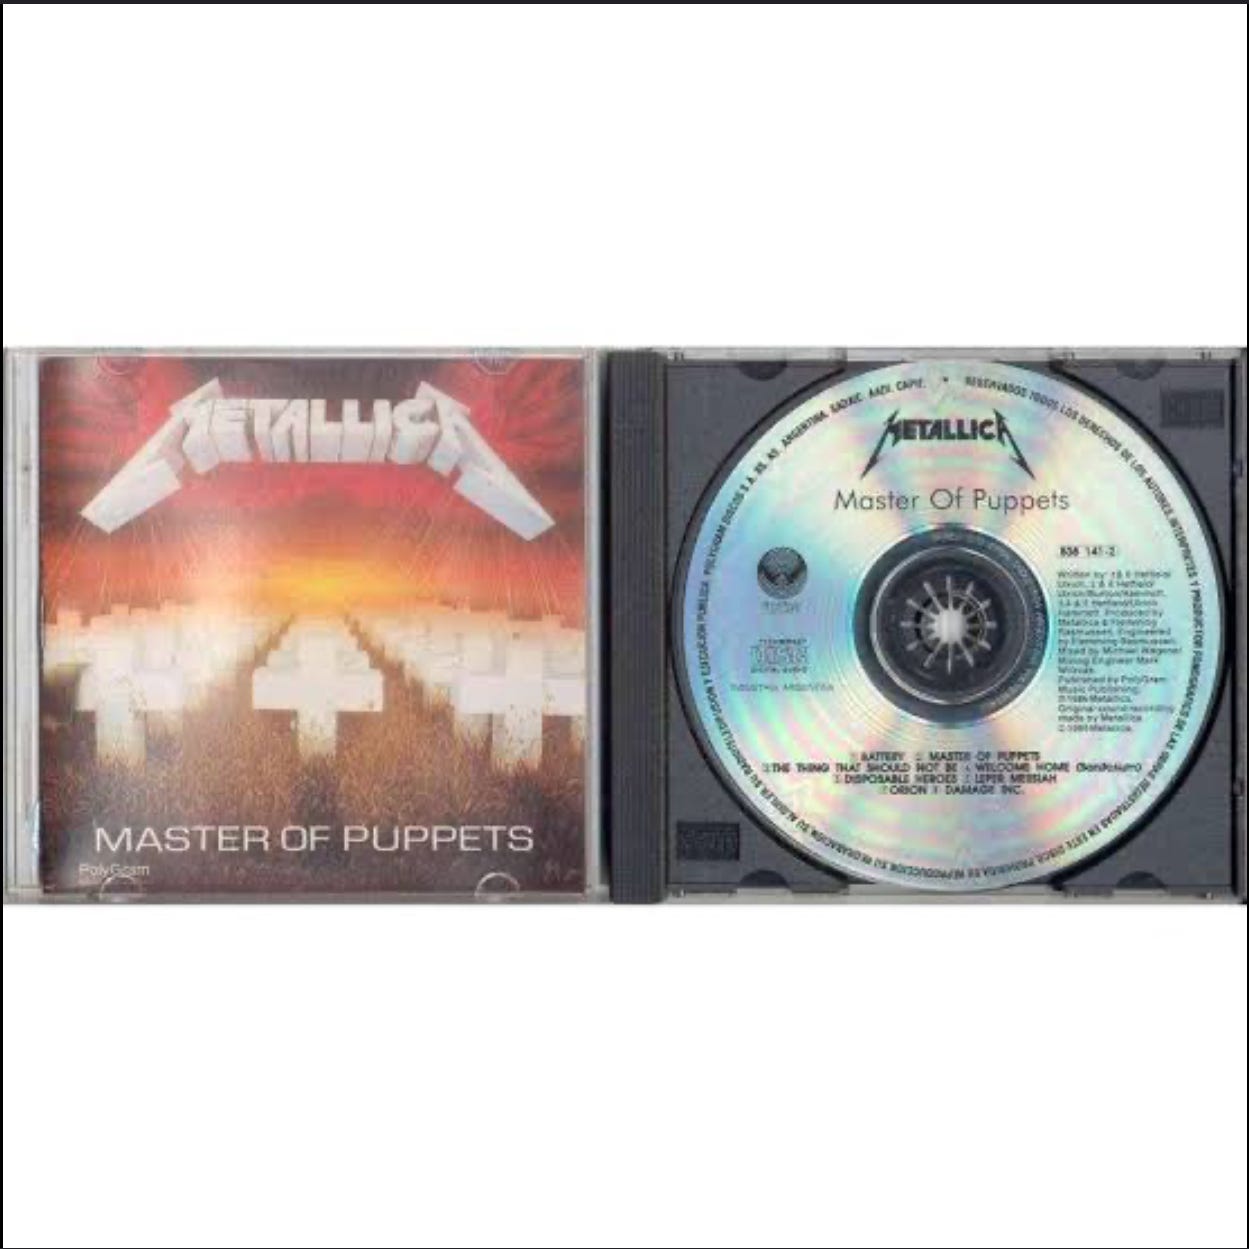 Metallica - Master Of Puppets (remastered) - CD 